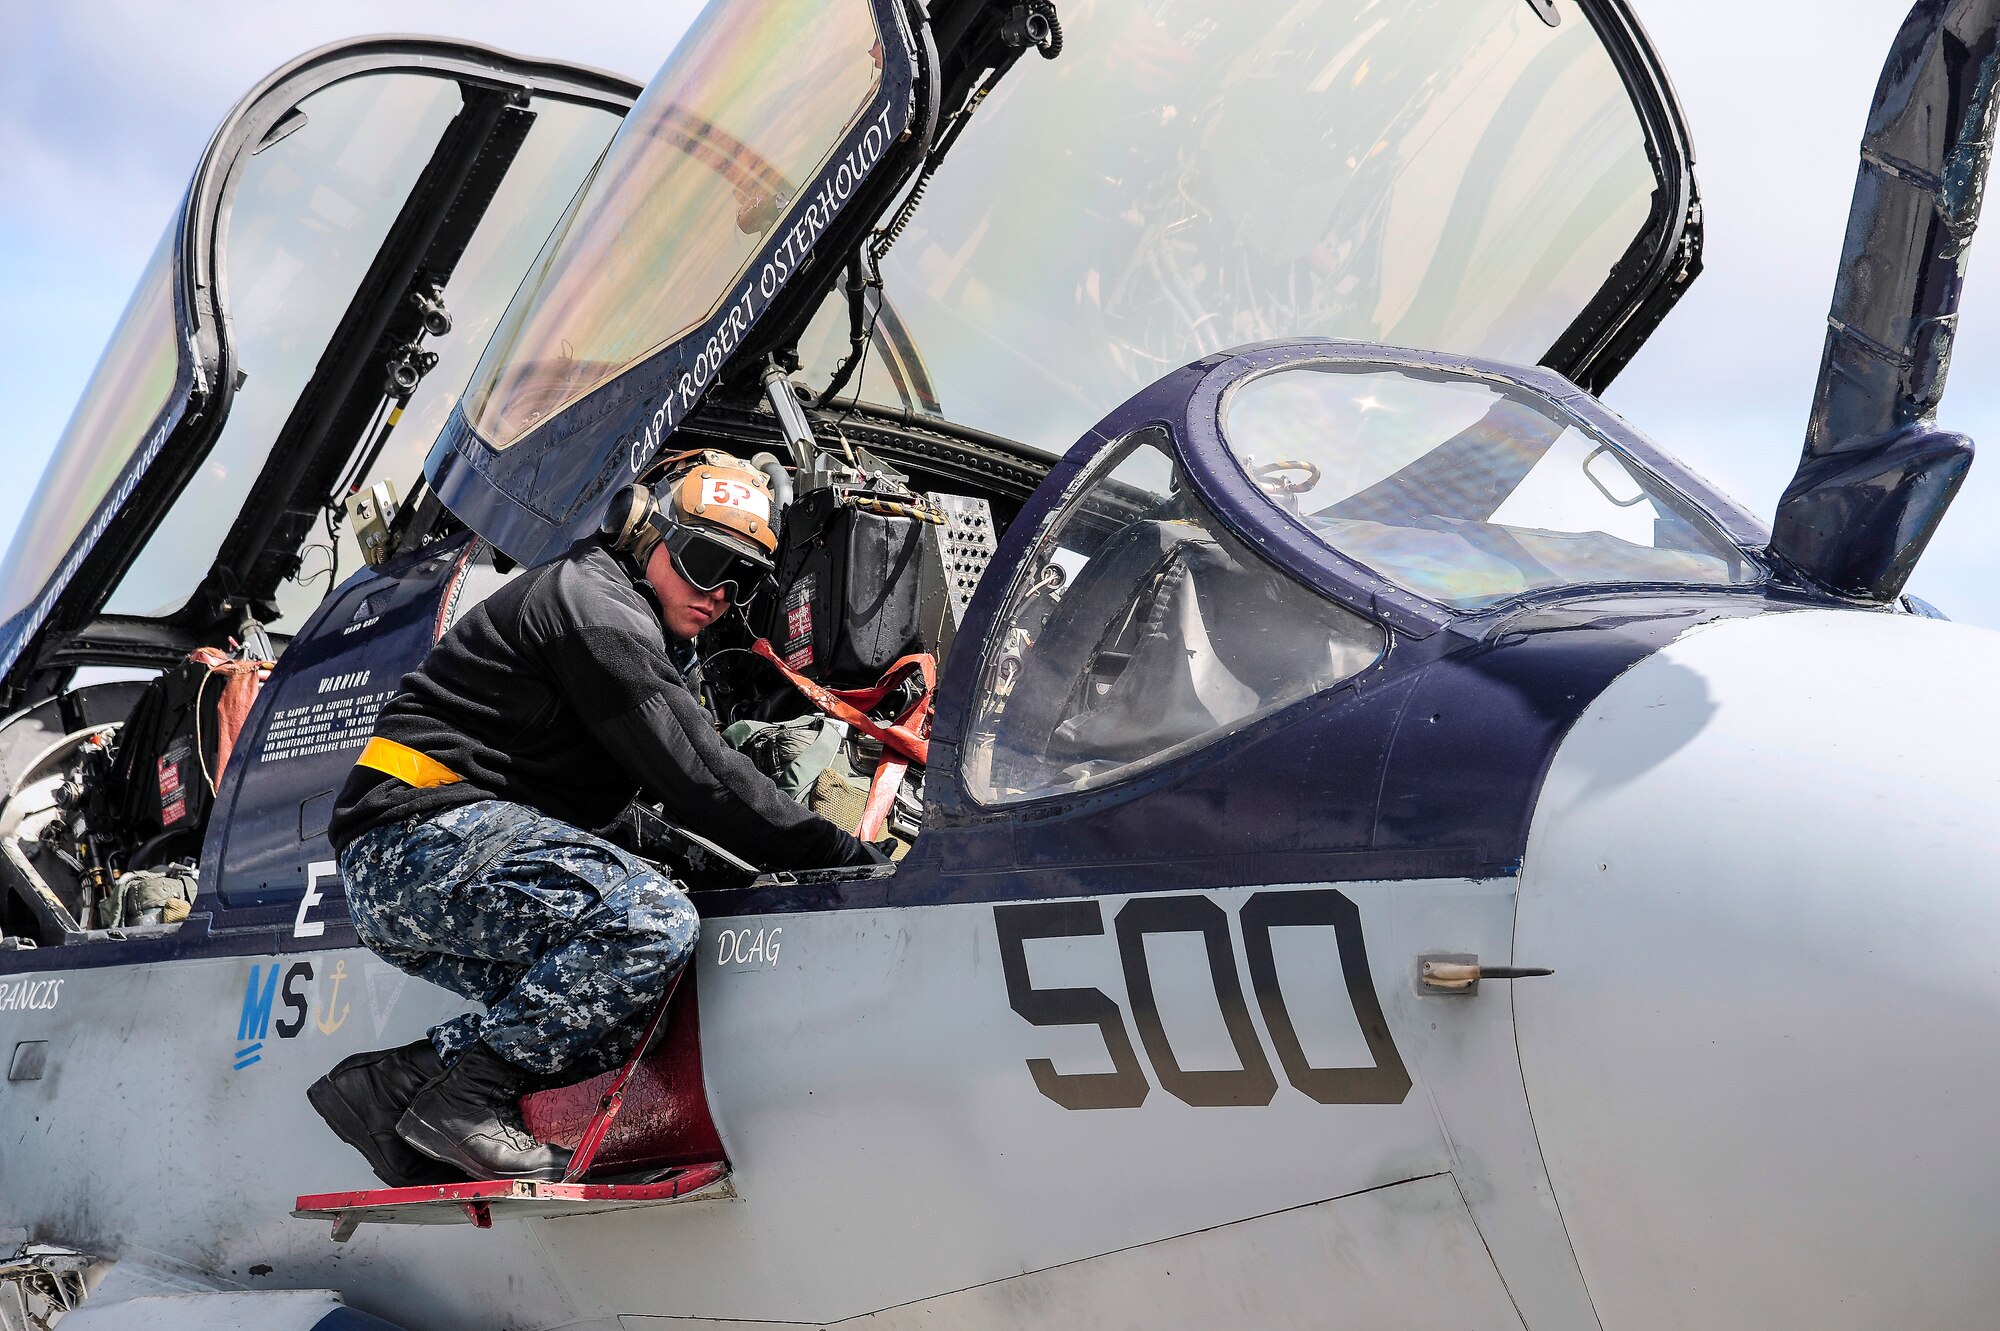 A U.S. Navy EA-6B Prowler crew chief from the Electronic Attack Squadron 142, Naval Air Station Whidbey Island, Oak Harbor, Wash., performs preflight procedures during RED FLAG-Alaska 14-1 May 22, 2014, Eielson Air Force Base, Alaska. The Prowler is a twin-engine, mid-wing electronic warfare aircraft derived from the A-6 Intruder. (U.S. Air Force photo by Senior Airman Zachary Perras/Released)